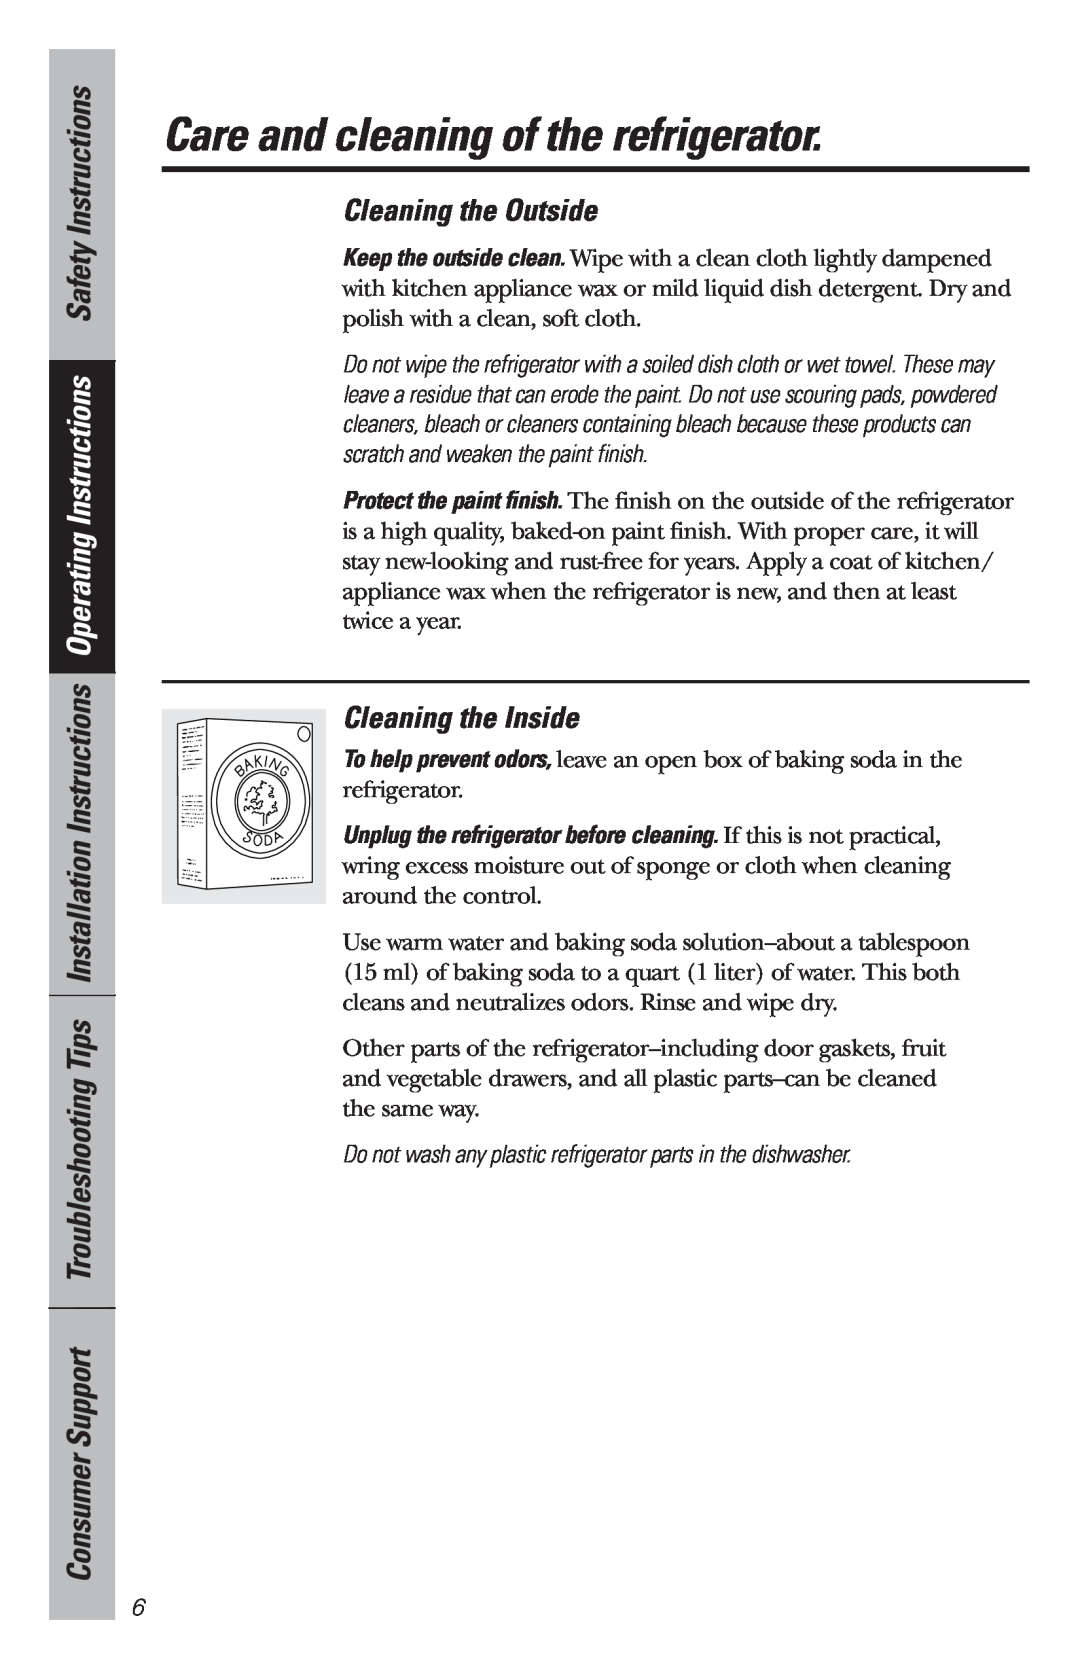 GE WMR04GAV owner manual Care and cleaning of the refrigerator, Cleaning the Outside, Cleaning the Inside 